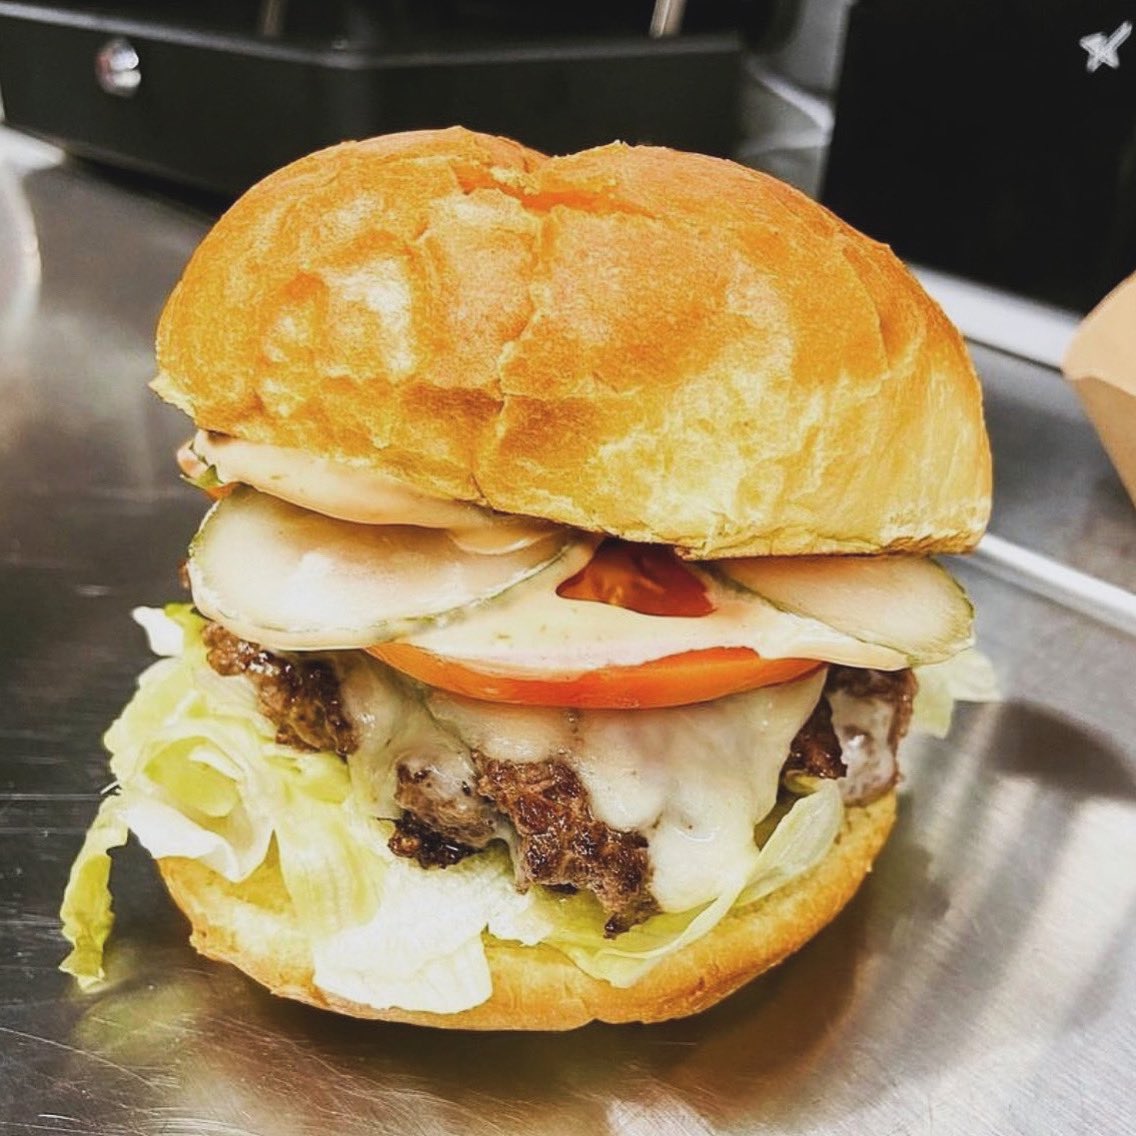 Get yer bunz down to @NightShiftBeer today, 12-6p & crush about 13 of the finest #burgerporn that you can!

🤘🍔🤘
Hail & Grill! 
#eatlocal #foodporn #foodie #bostonfoodtrucks 
 #cheflife #burgertime #bostoneats #pubgrub #barfood #drinklocal #nightshiftbrewing #burgersandbeer